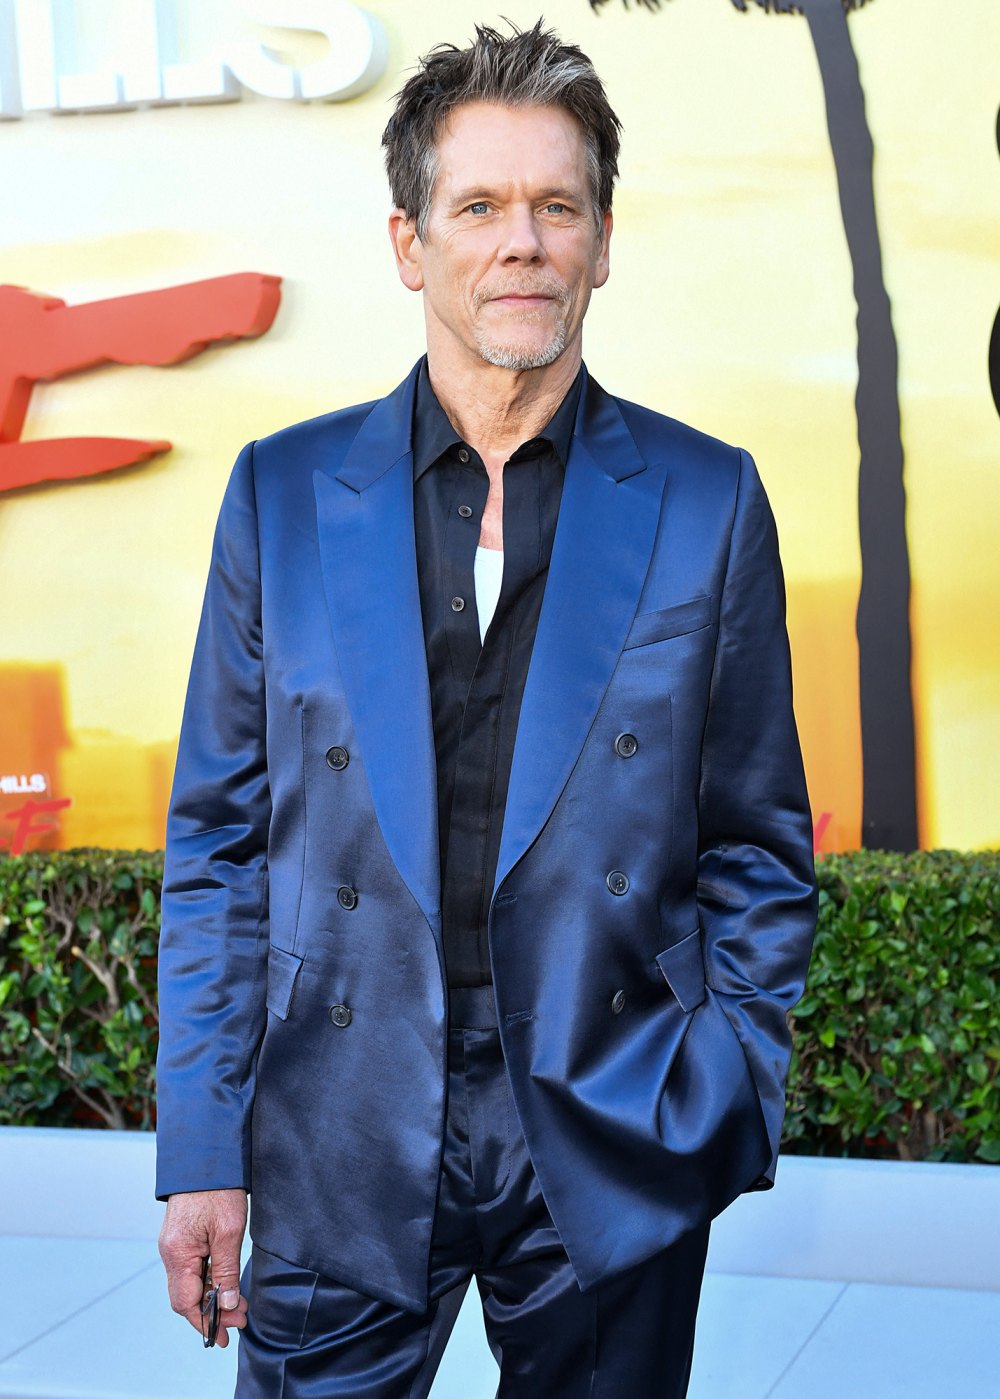 Kevin Bacon Says He Hasn’t Been to the Oscars in 40 Years